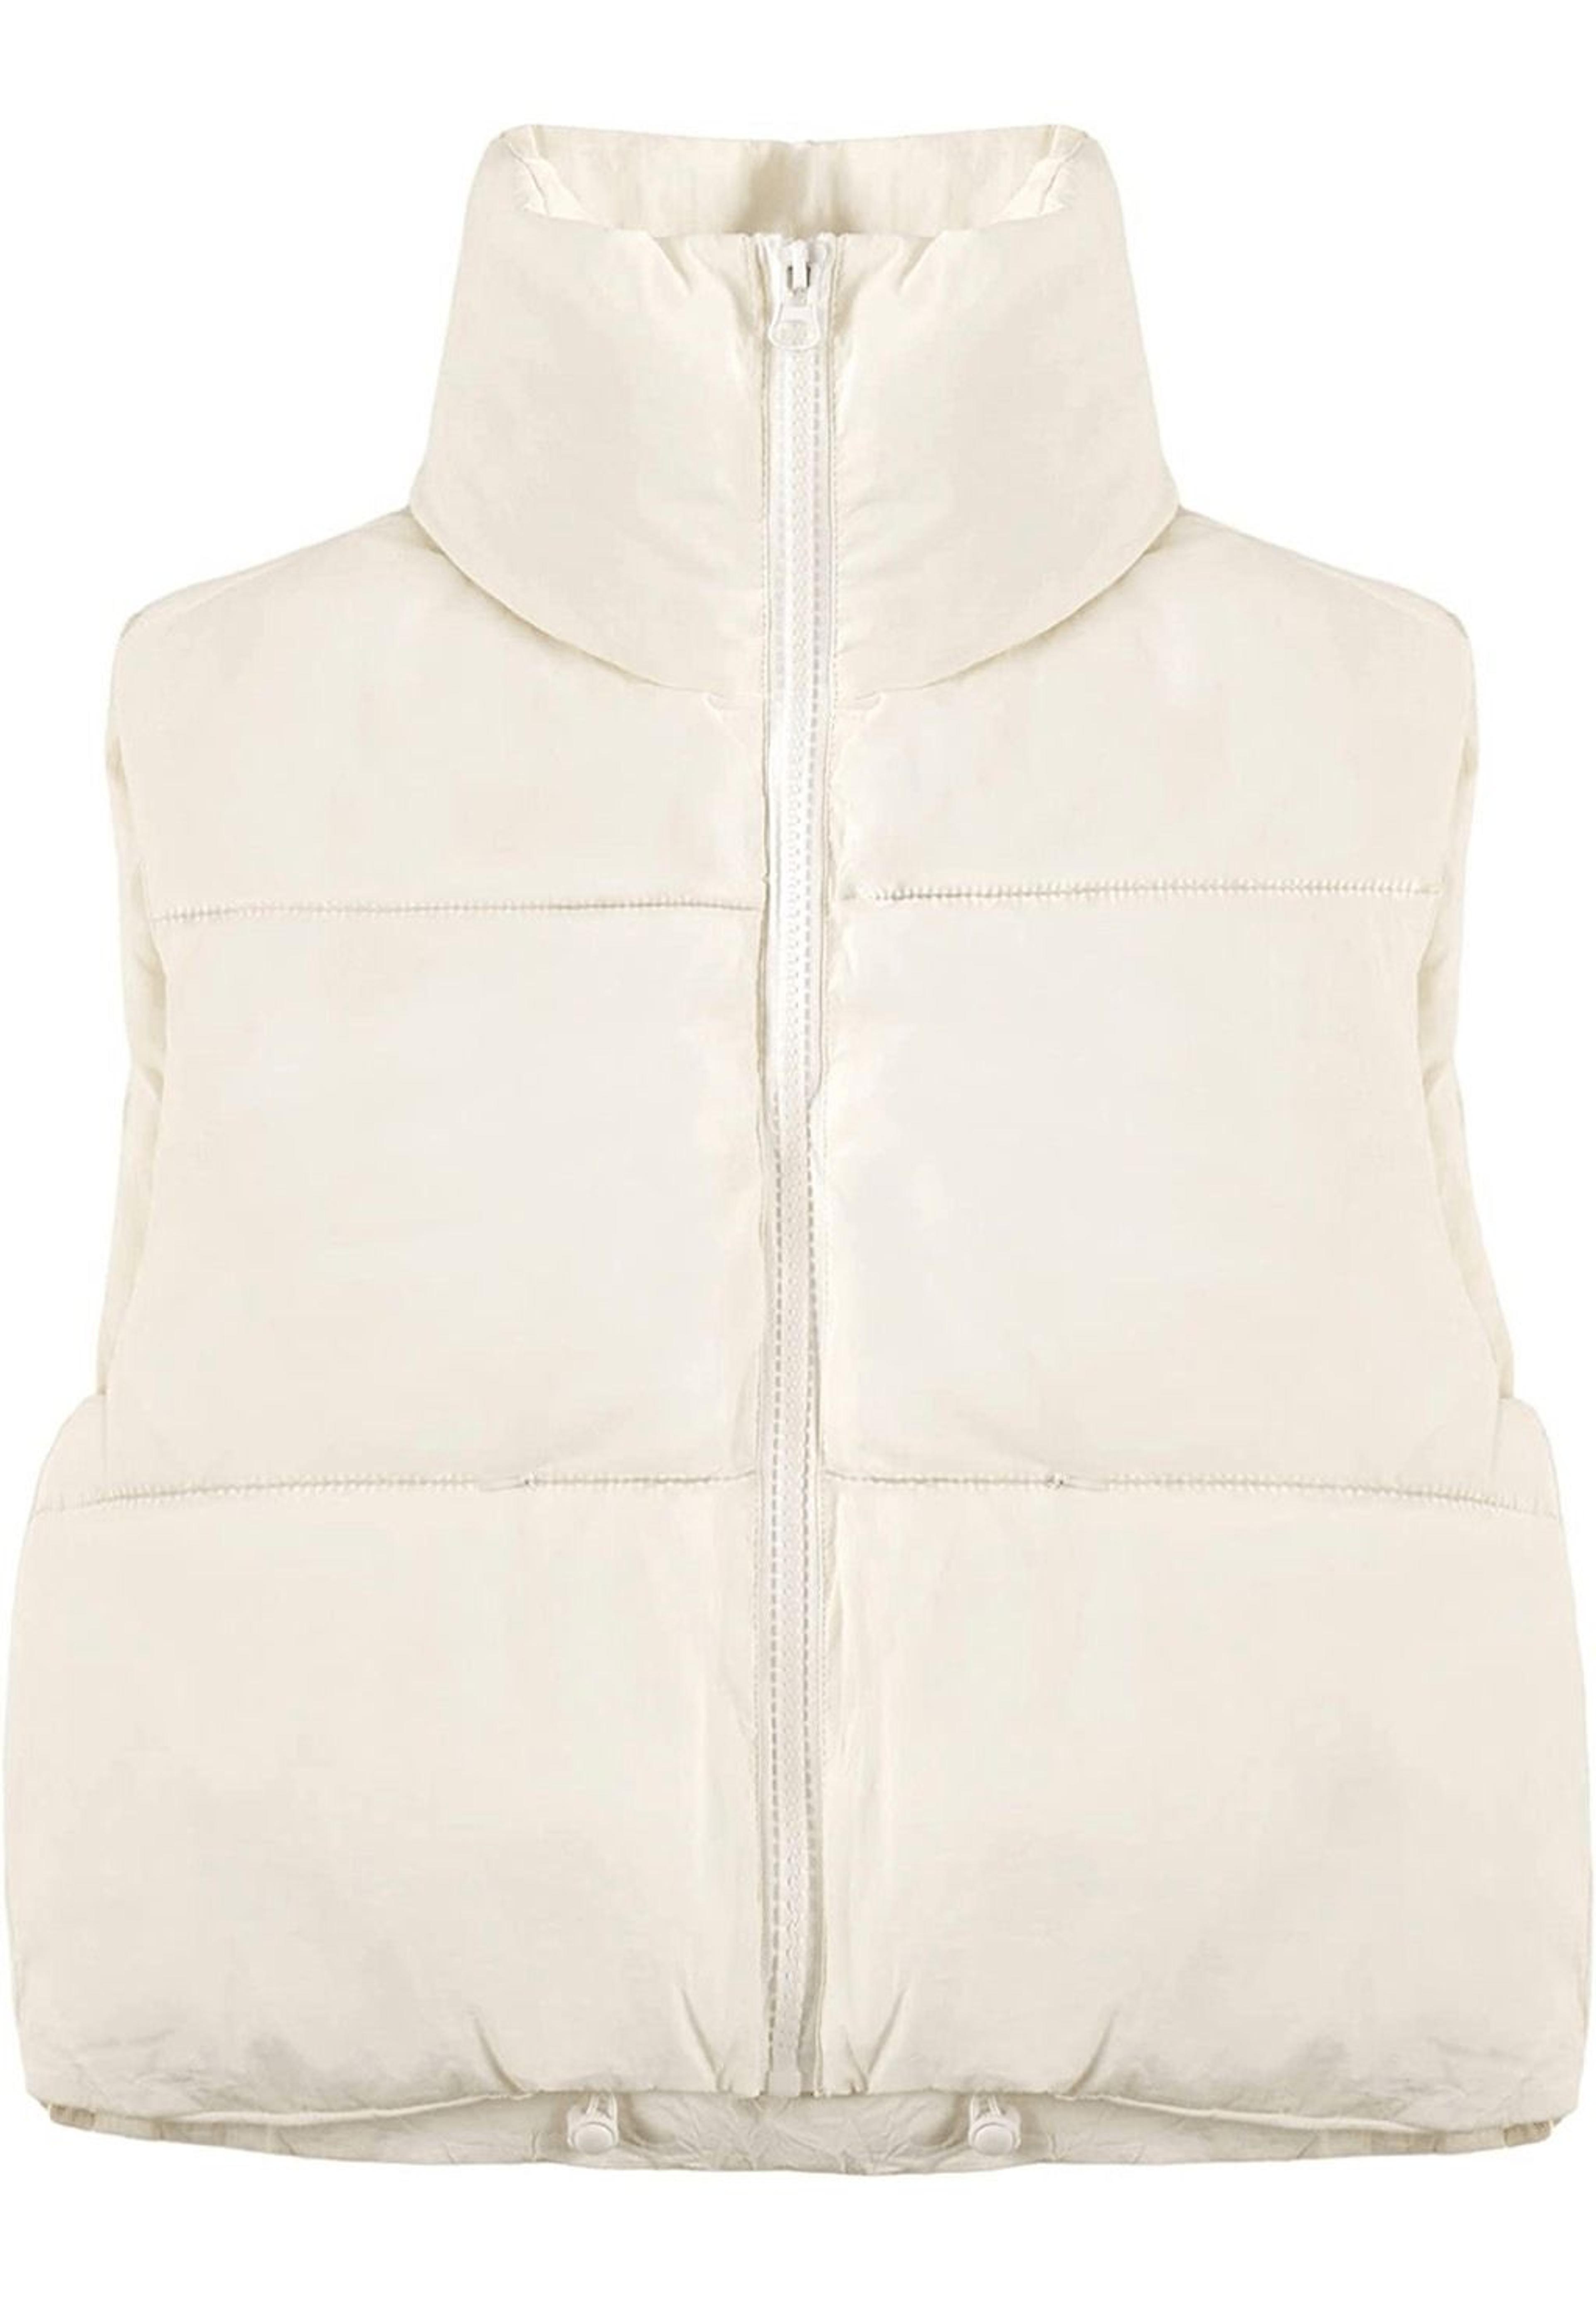 Merokeety Cropped Puffer Vest Zip Up Large